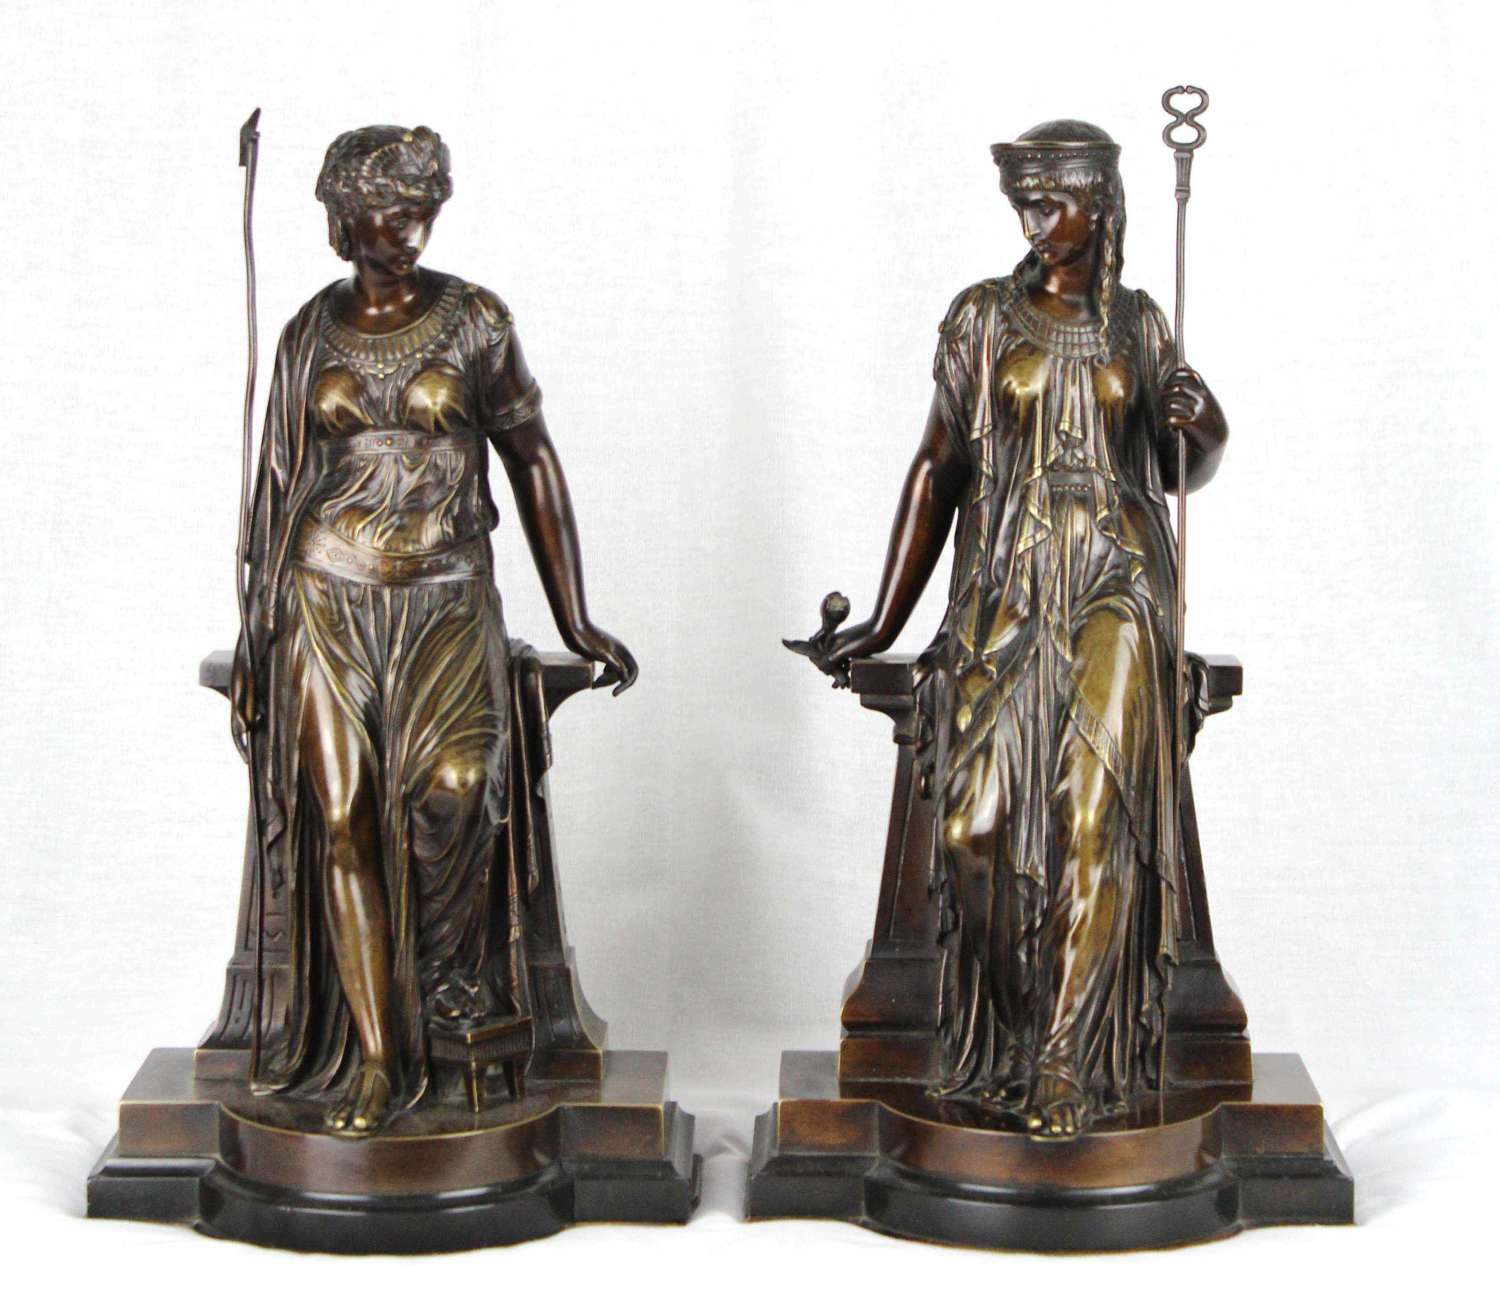 A 19th Century Egyptian style bronze maidens by Eutrope Bouret